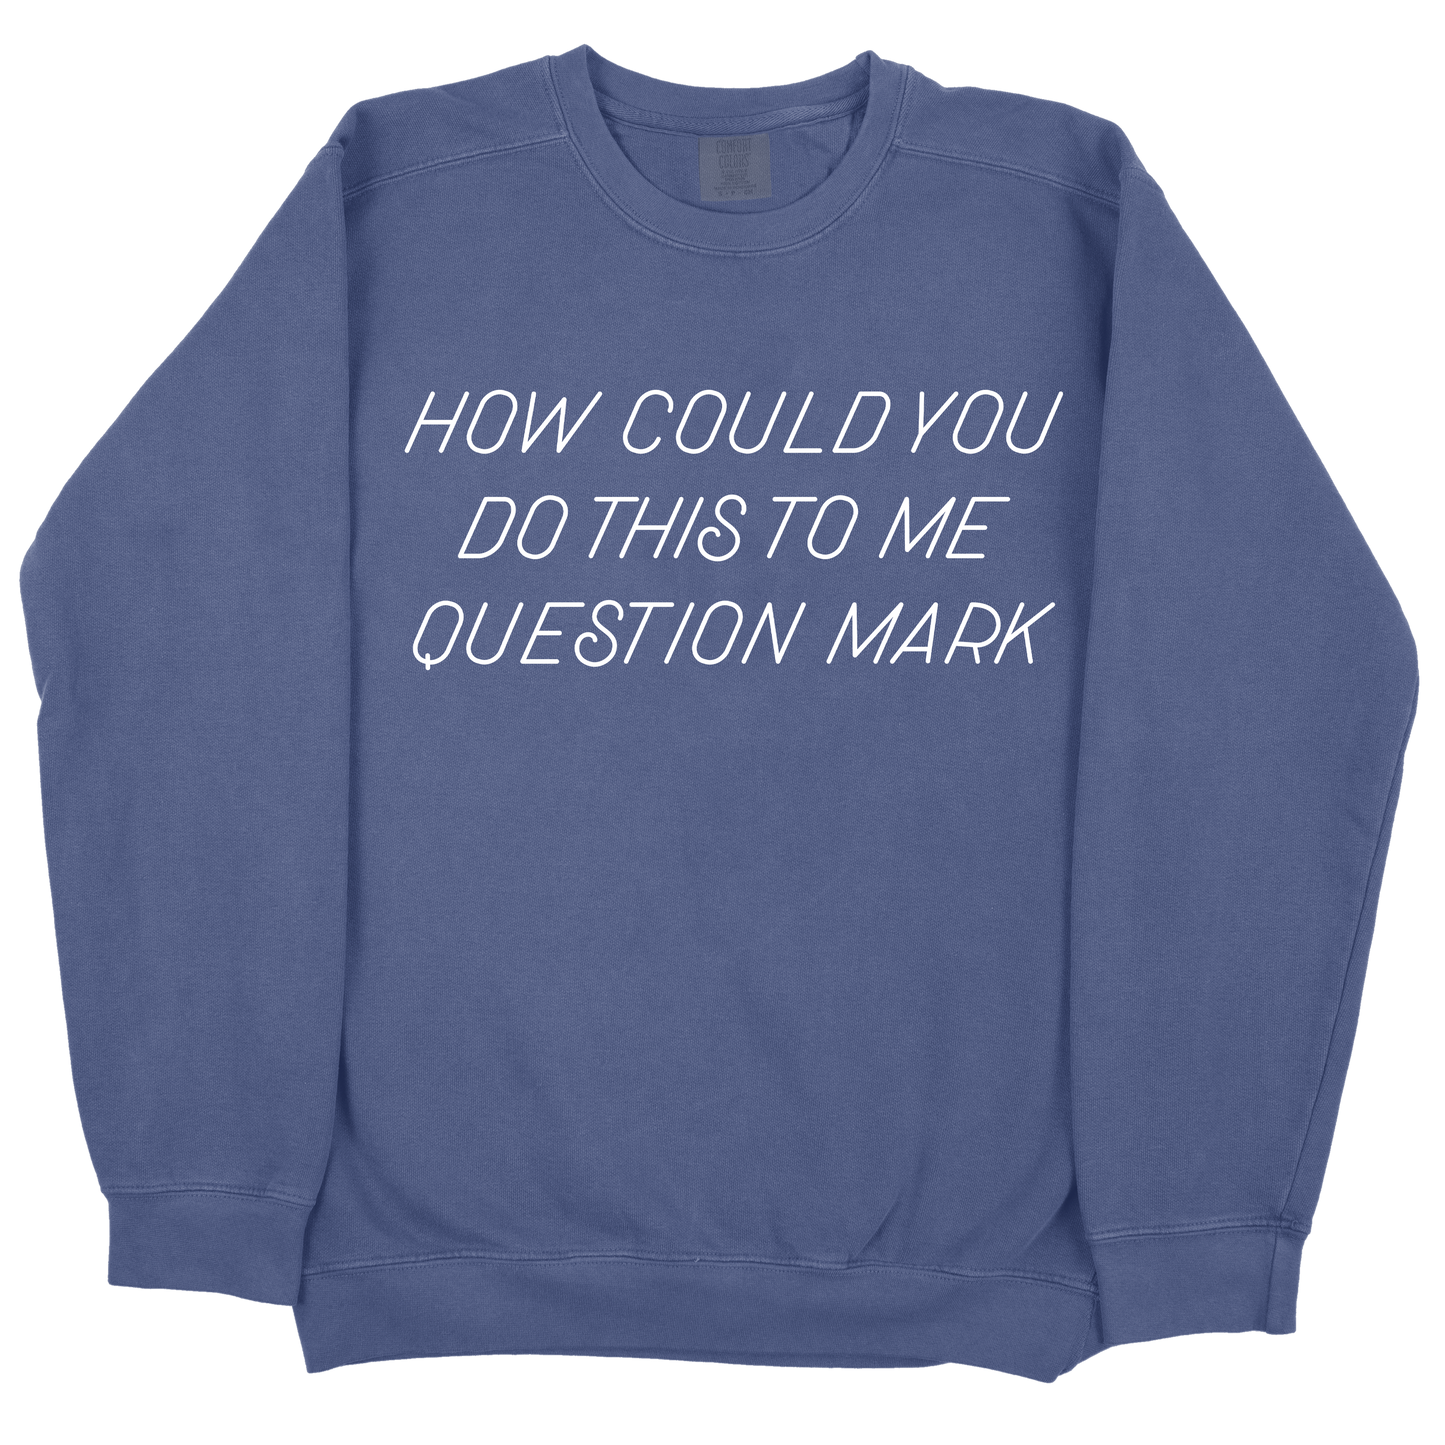 How Could You Do This To Me Question Mark CC Sweatshirt - Navy